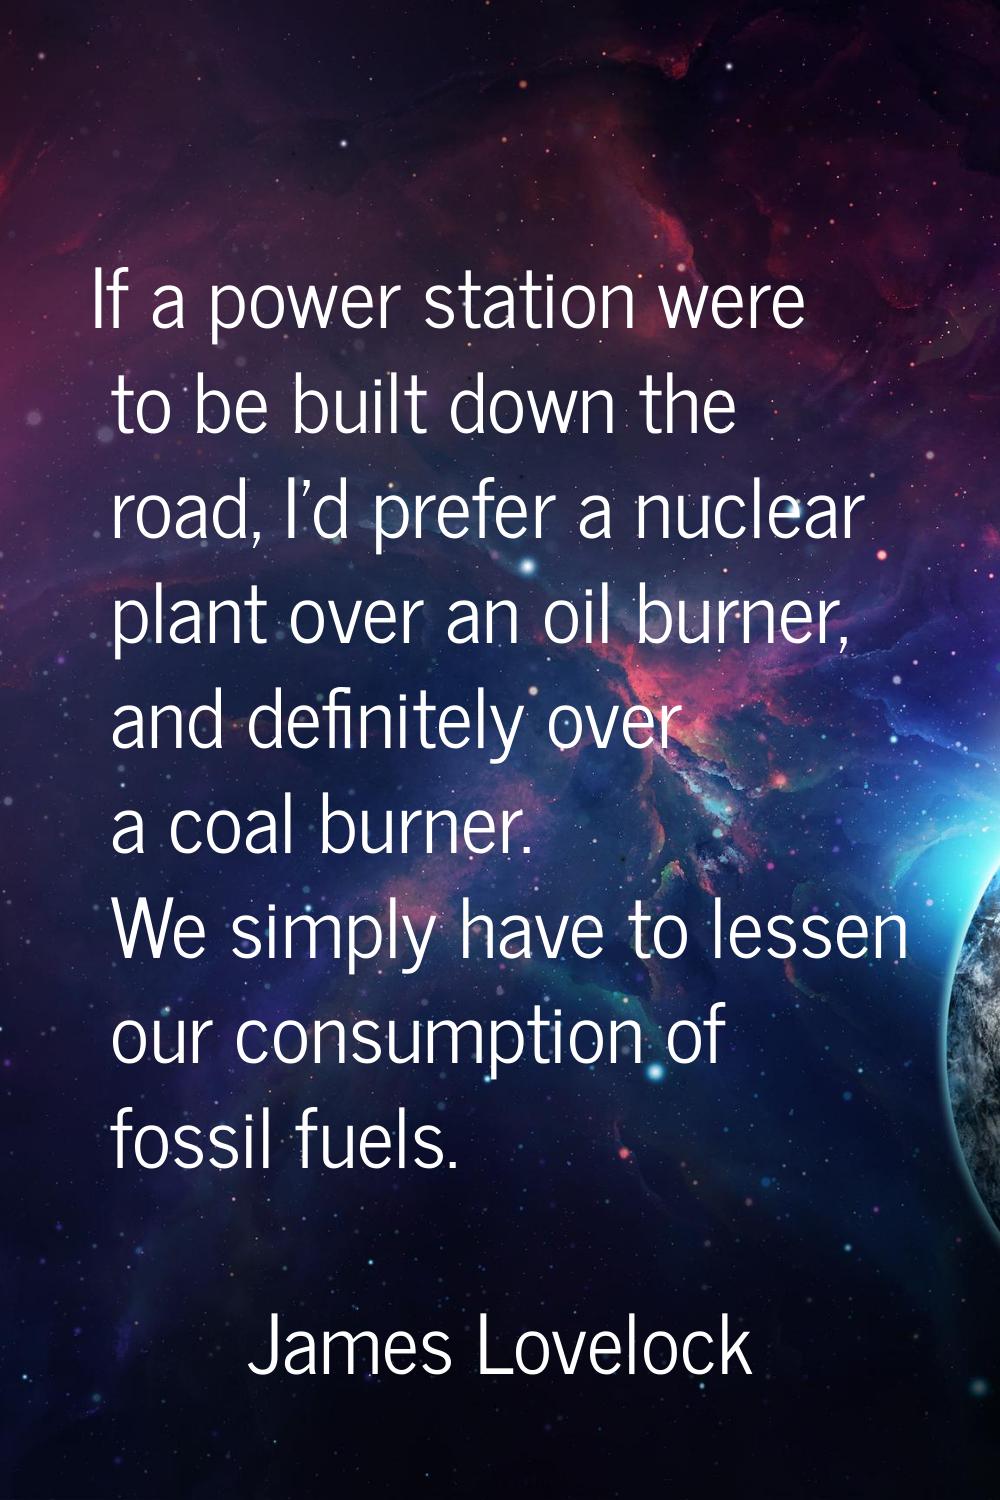 If a power station were to be built down the road, I'd prefer a nuclear plant over an oil burner, a